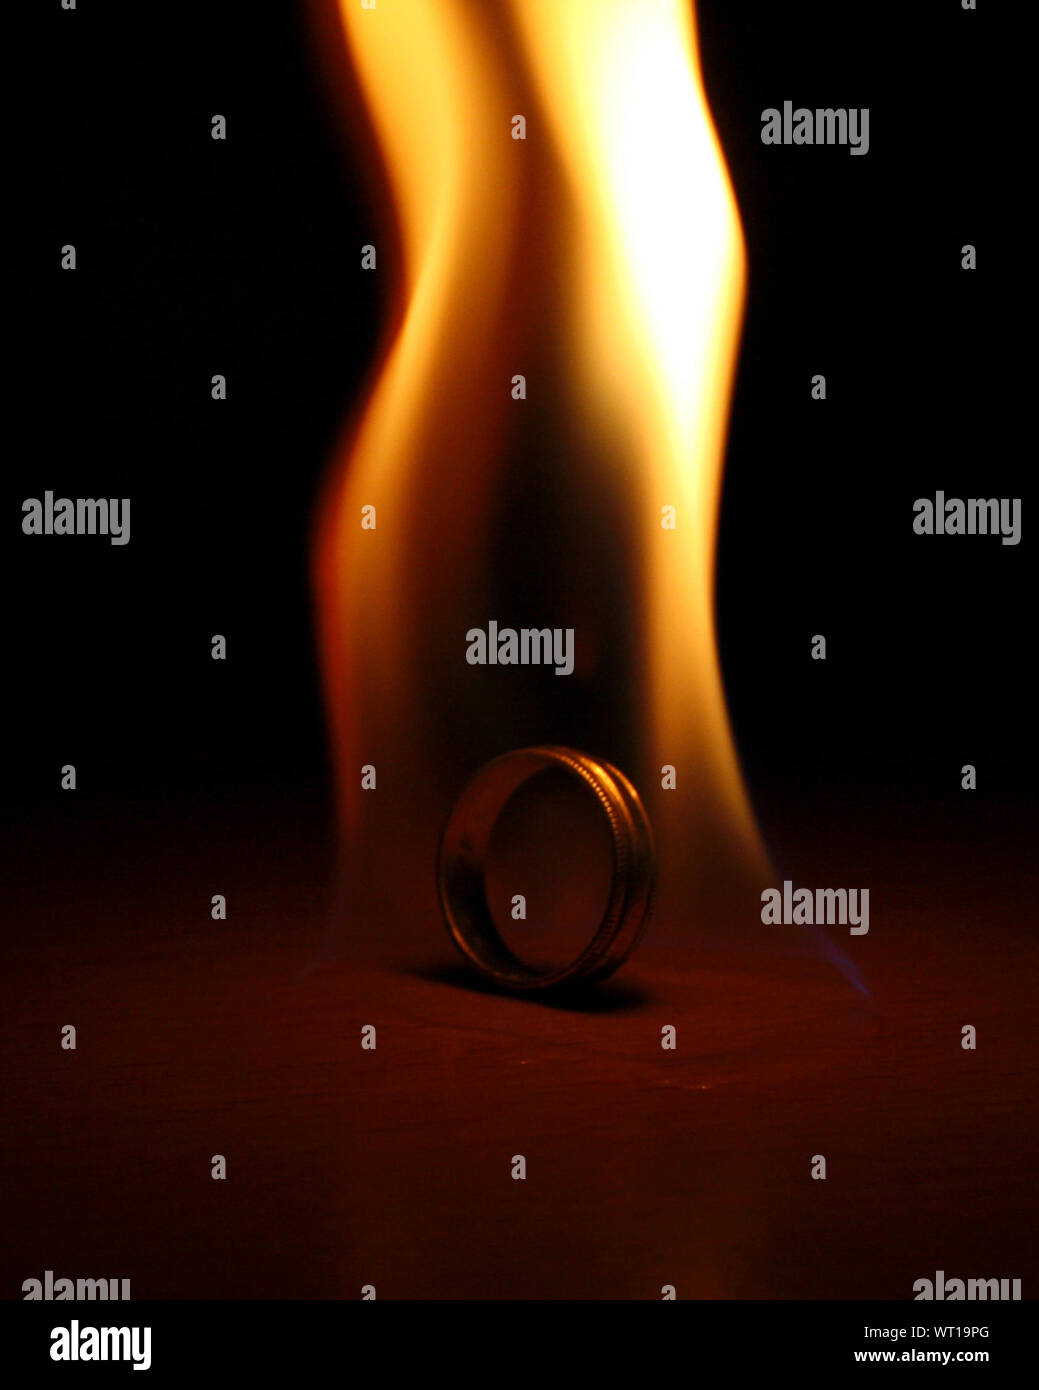 Ring On Fire At Table Stock Photo